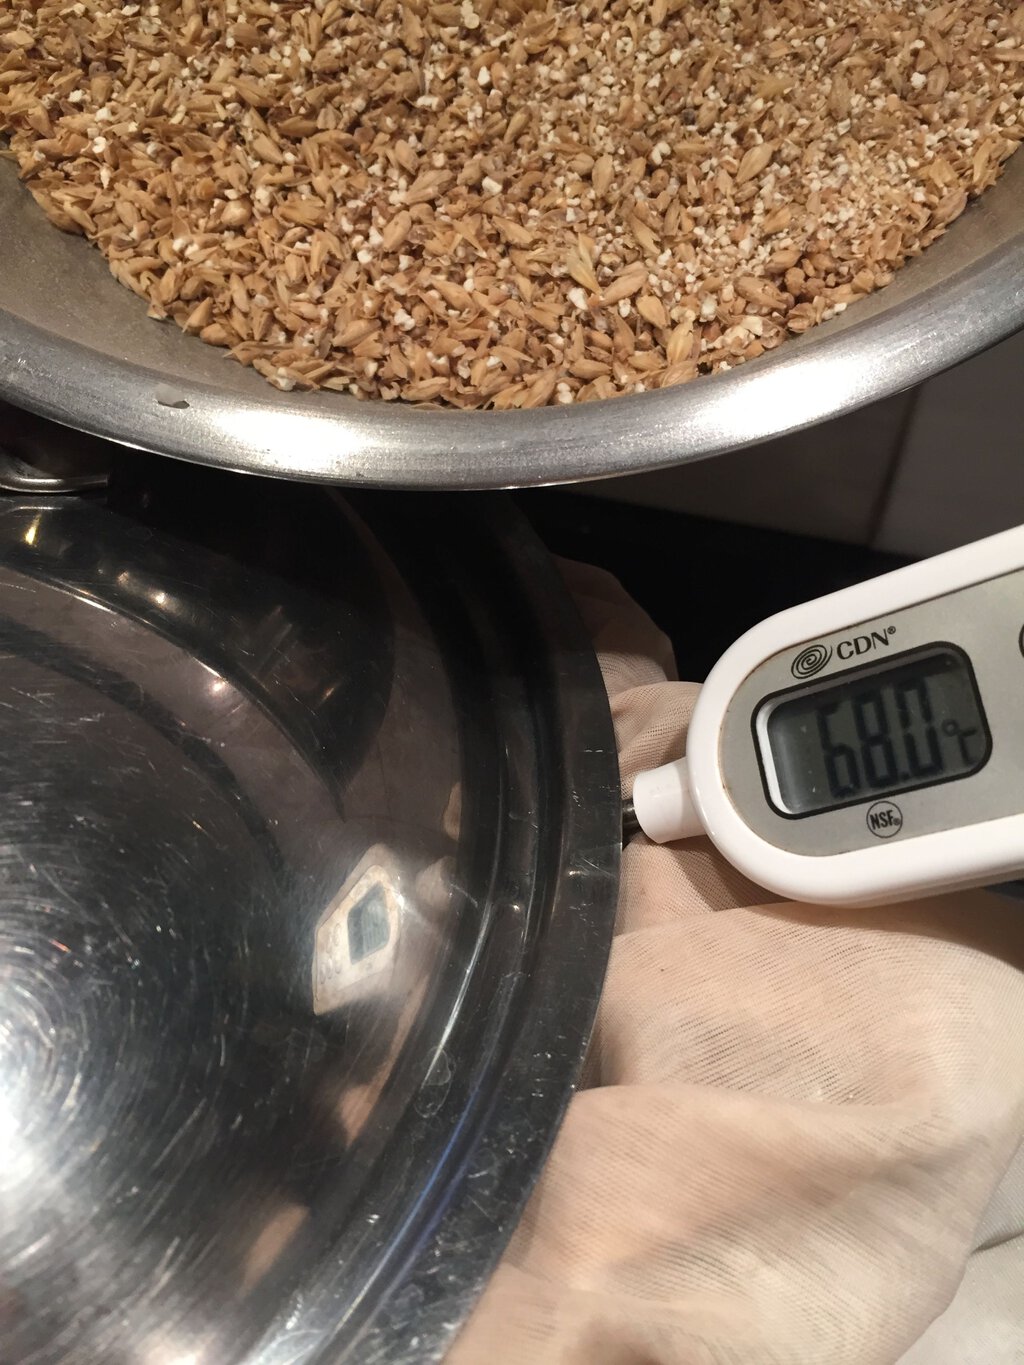 Adding malted barley. Diastatic enzymes in the malt will convert the starches in both the rice and the barley